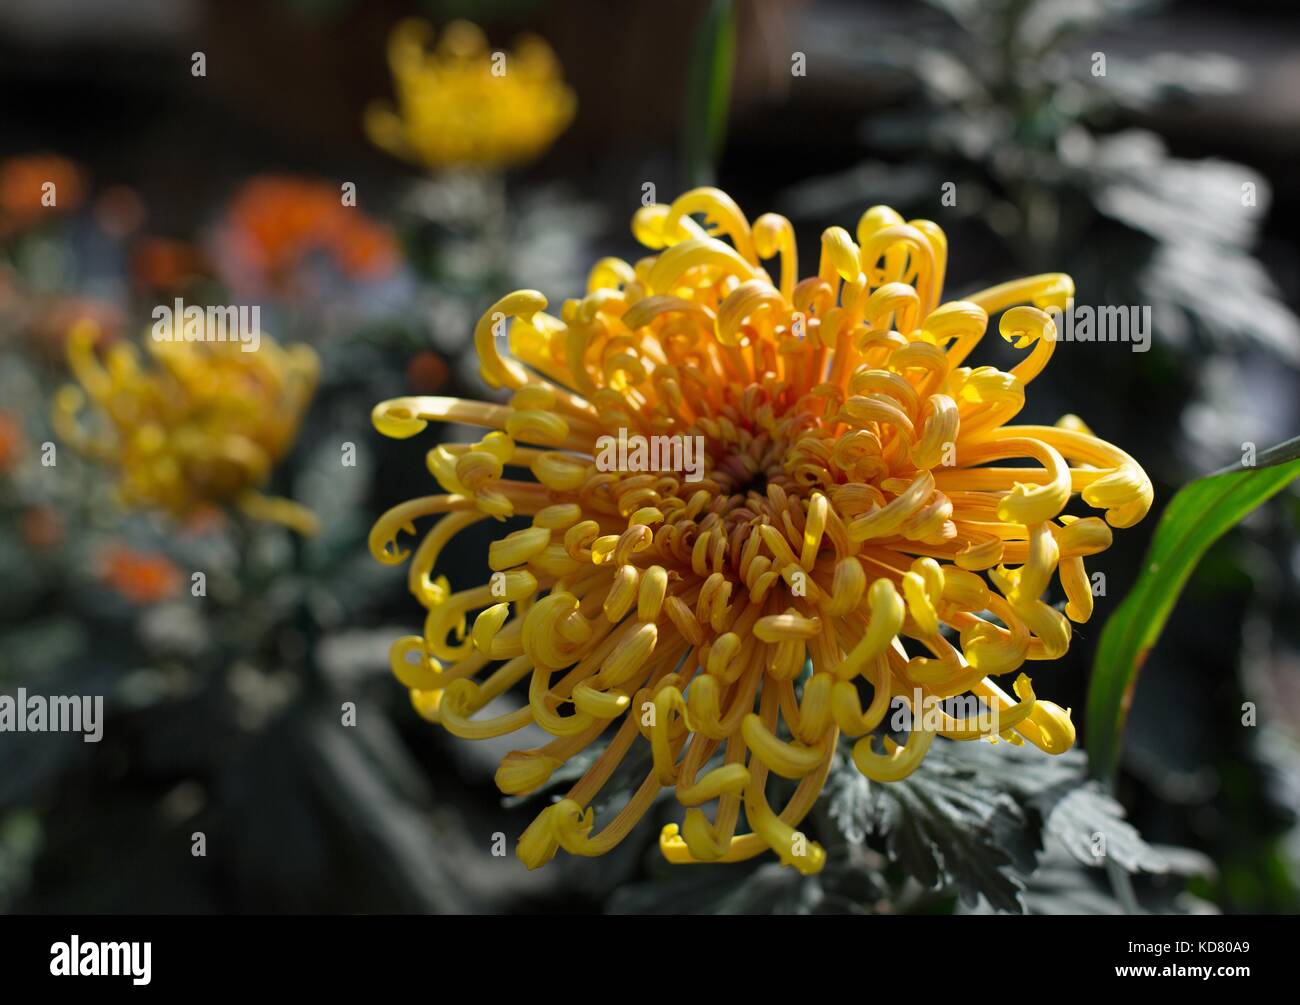 Close up of a yellow coral reef chrysanthemum flower. Stock Photo